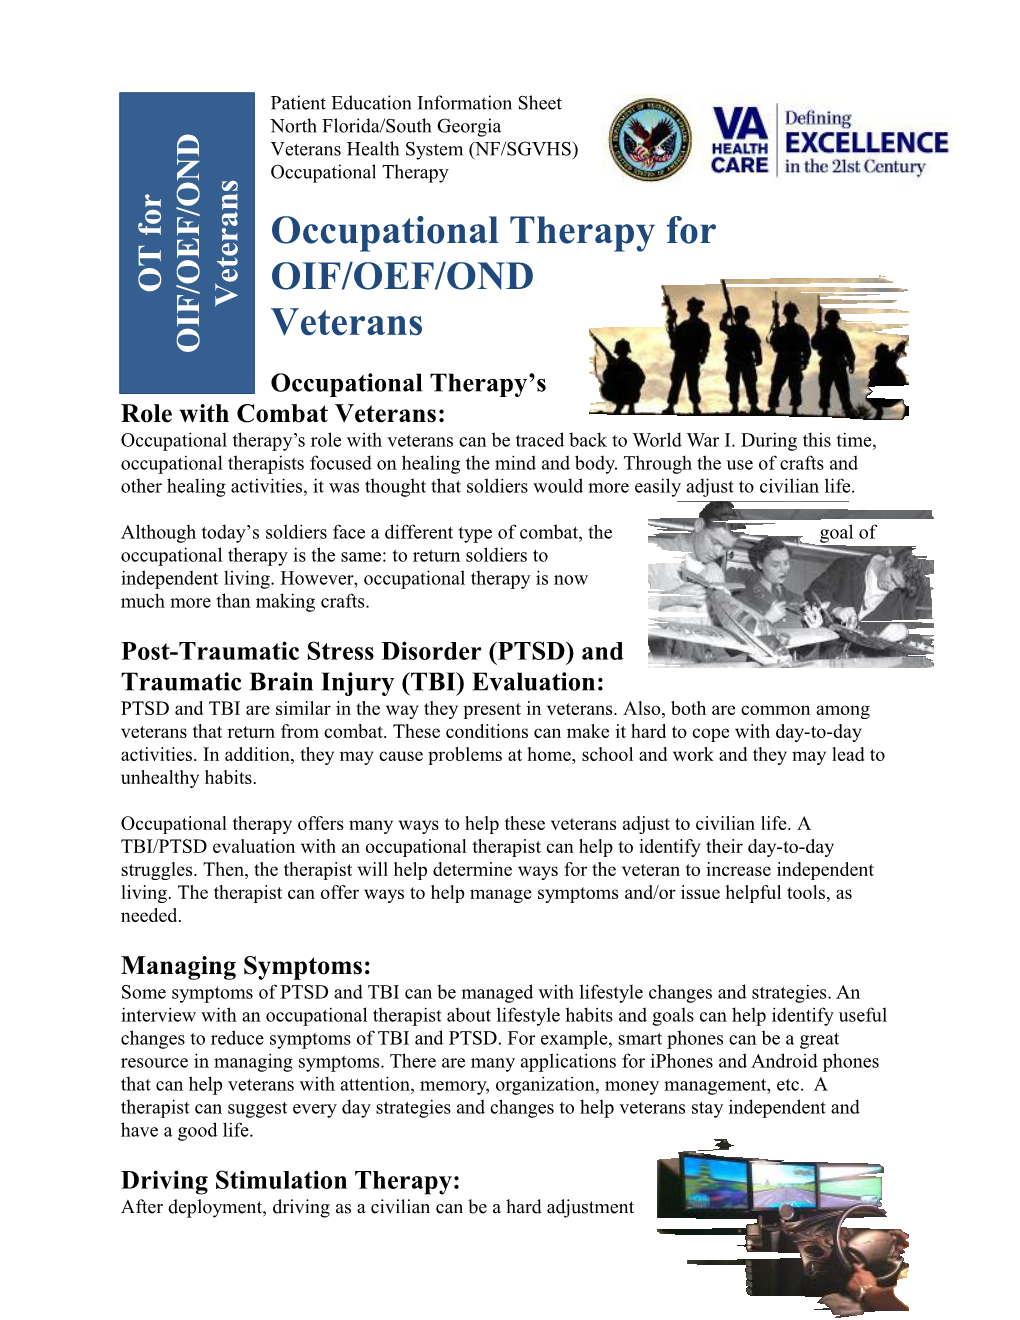 Occupational Therapy for OIF, OEF, and OND Veterans